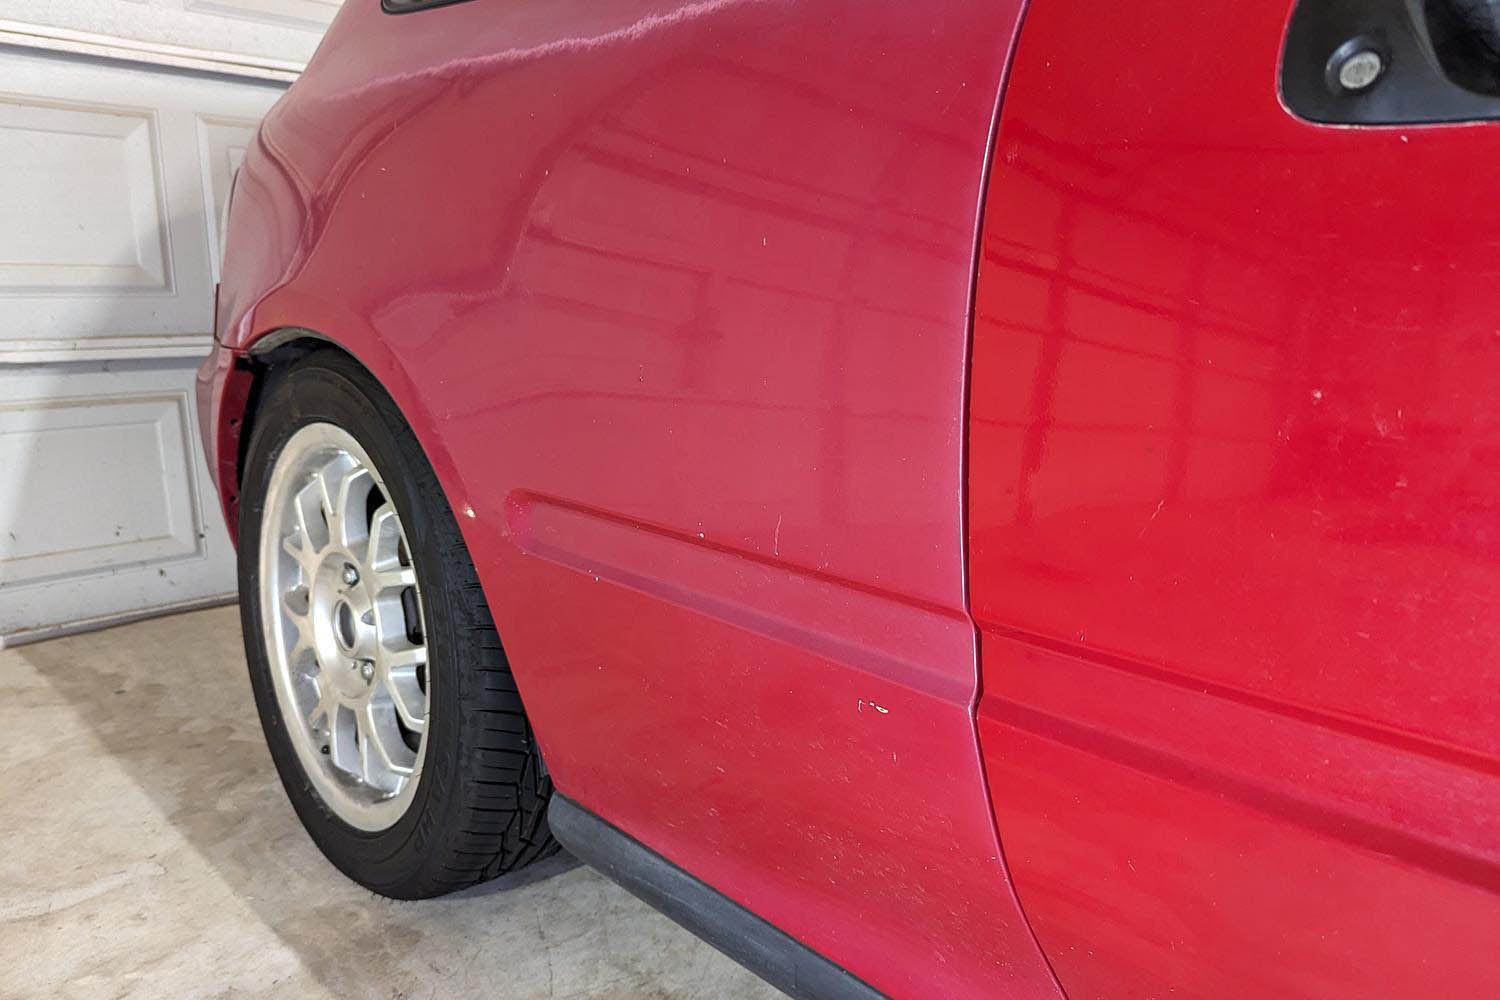 Detail shot of vintage Honda Civic with body panels in different shades of red.